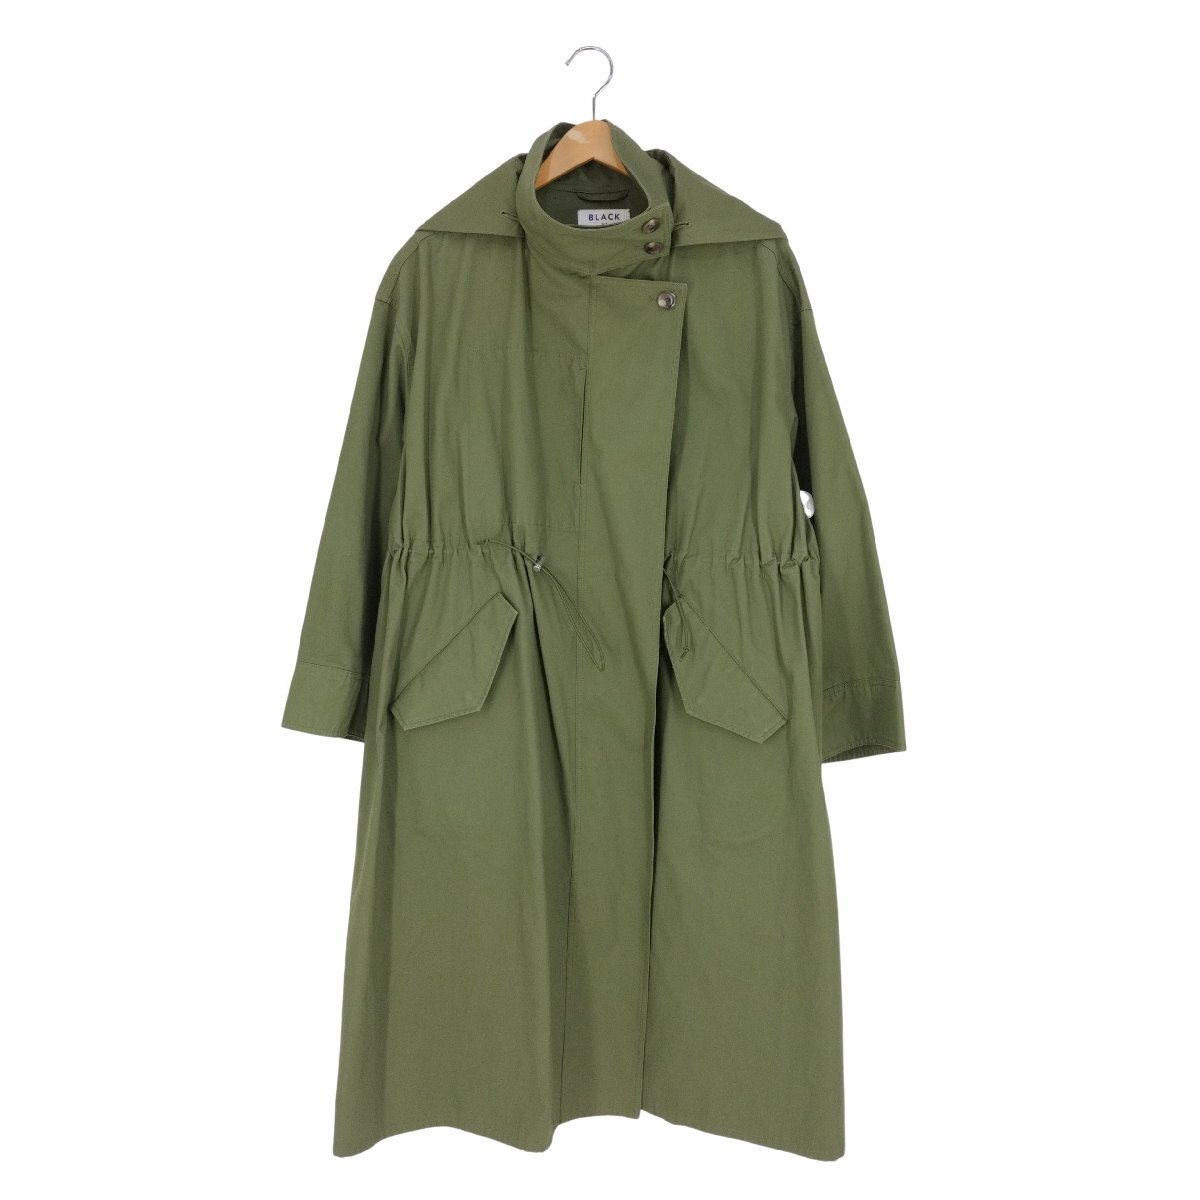 BLACK by moussy(ブラックバイマウジー) Military Mods Coat ミリタリーモ 中古 古着 1042_画像1